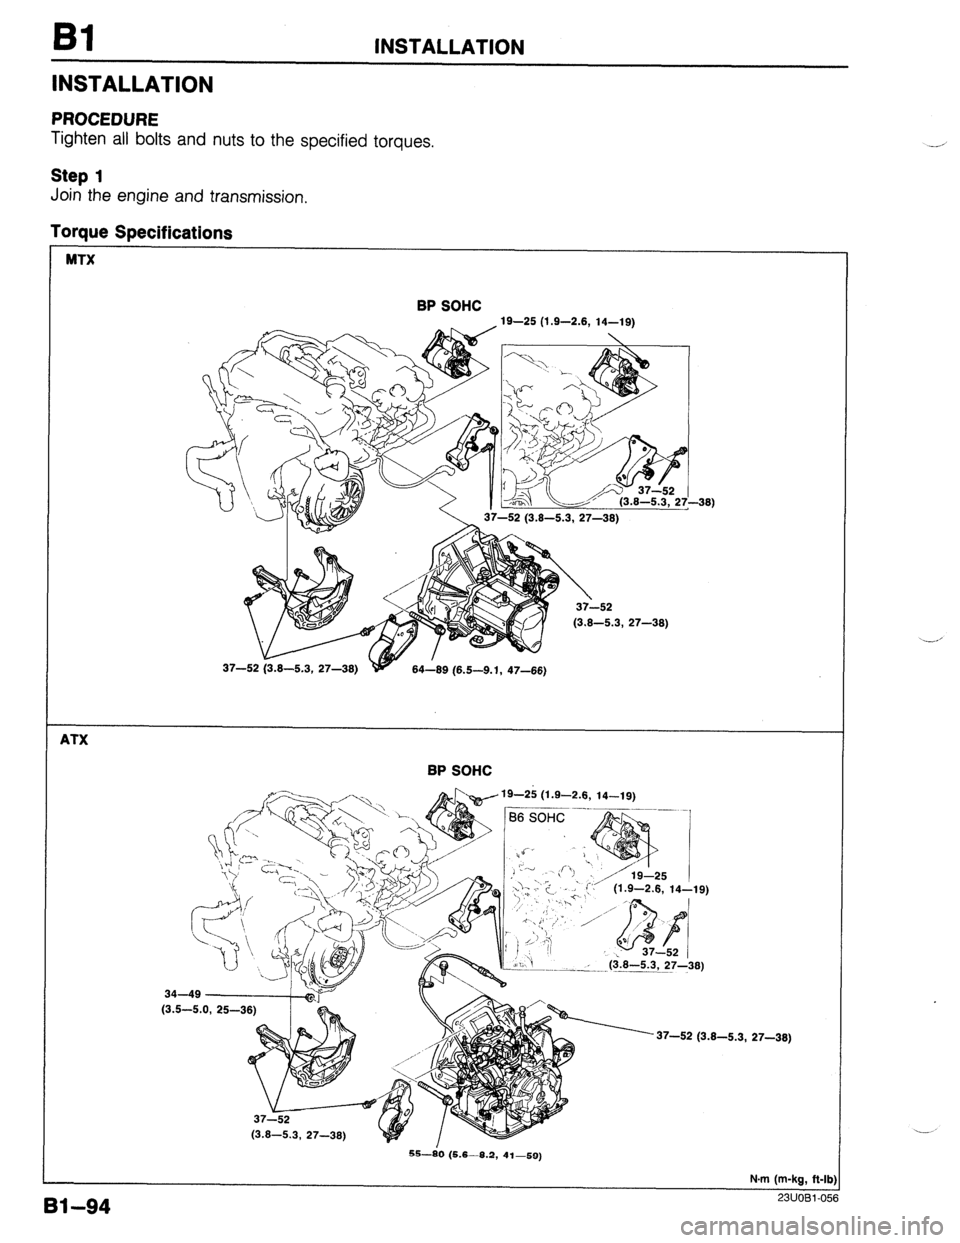 MAZDA PROTEGE 1992  Workshop Manual 81 INSTALLATION 
INSTALLATION 
PROCEDURE 
Tighten all bolts and nuts to the specified torques. 
Step 1 
Join the engine and transmission, 
Torque Specifications 
MTX 
BP SOHC 
19-25 (1.9-2.8, 14-19) 
